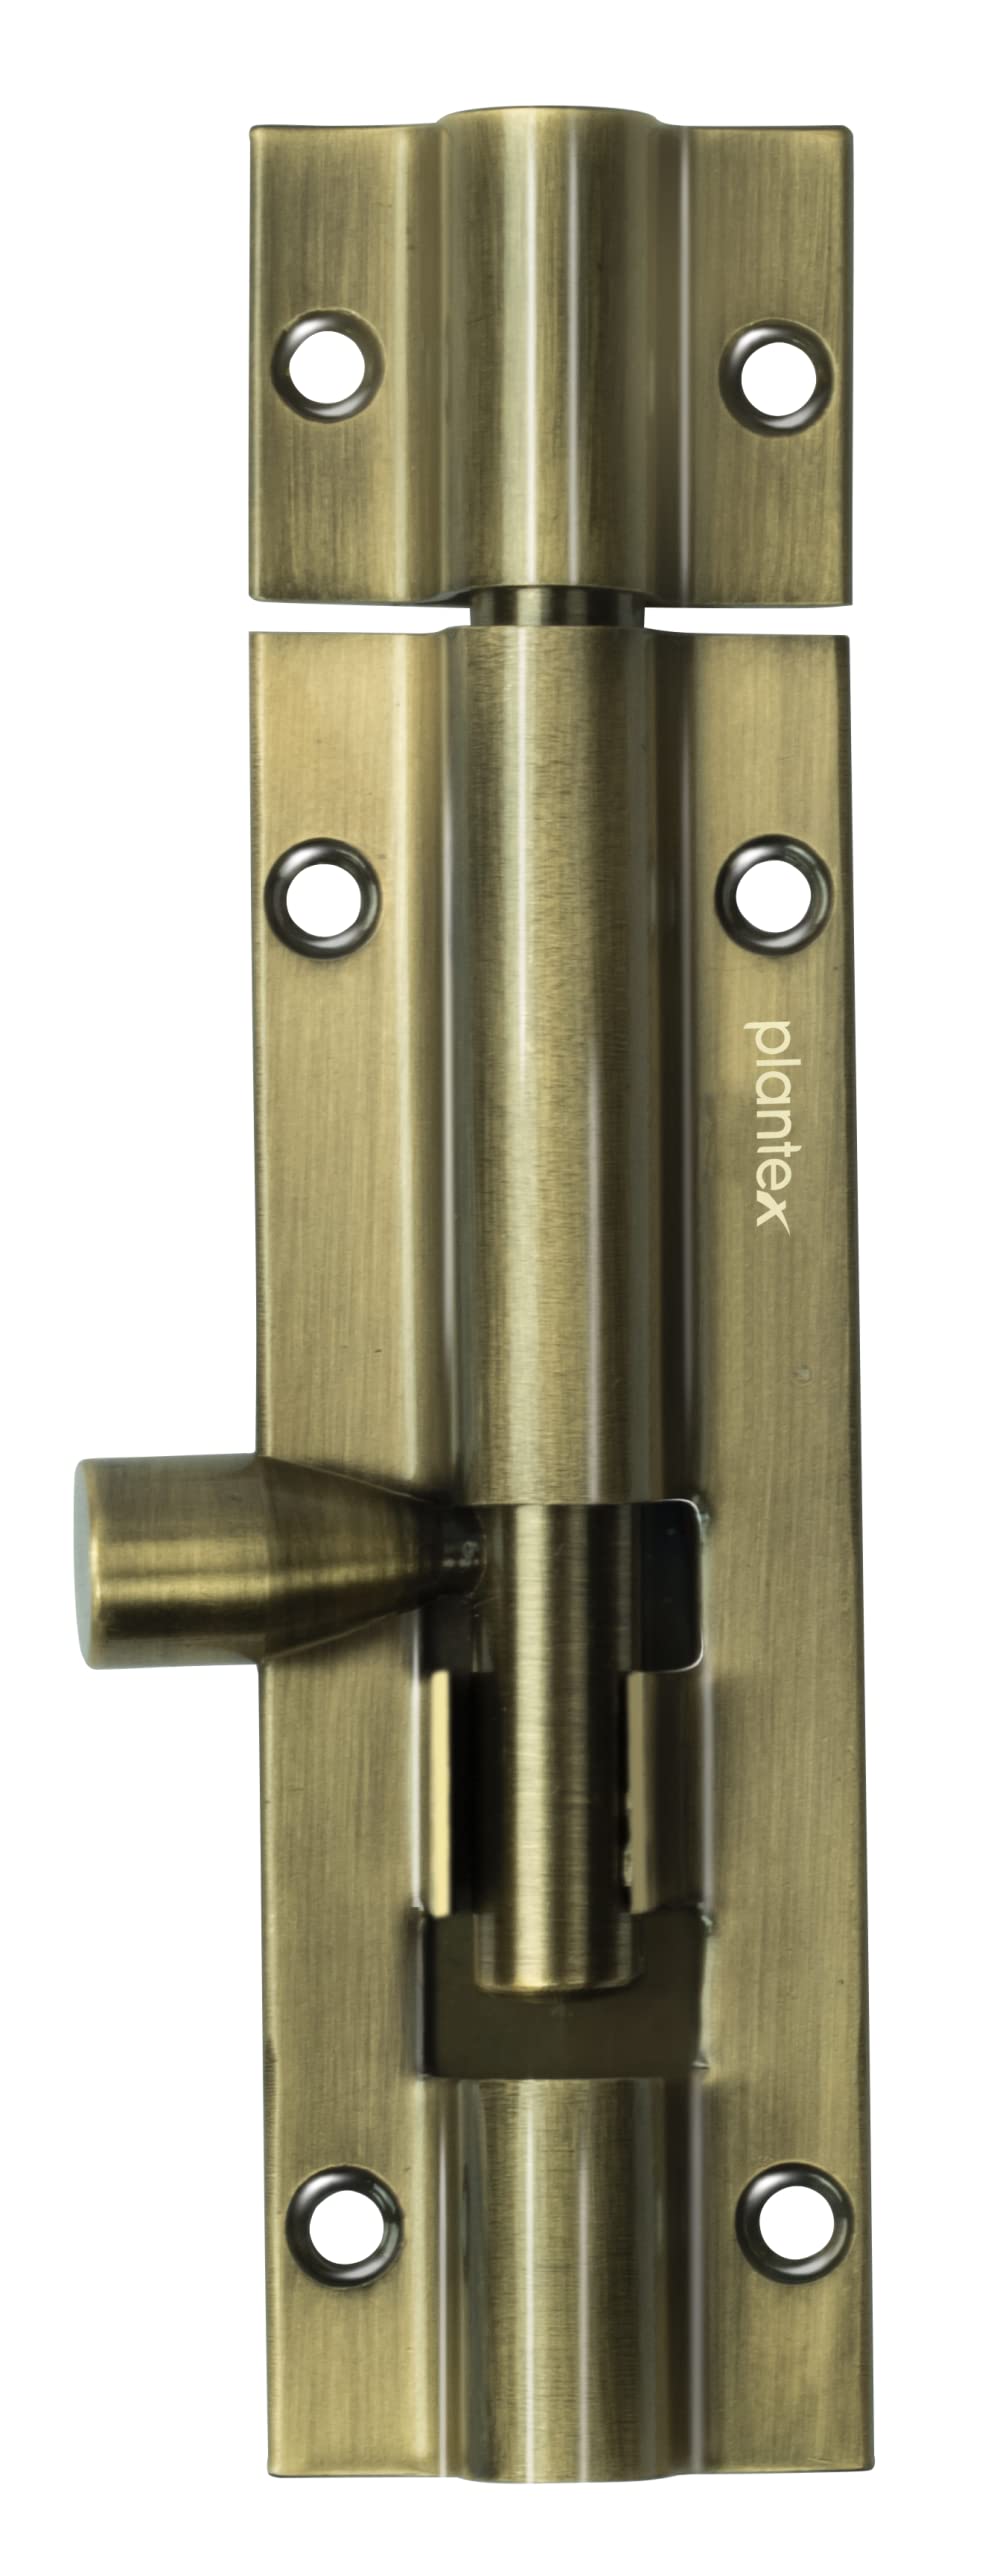 Plantex Heavy Duty 4-inch Joint-Less Tower Bolt for Wooden and PVC Doors for Home Main Door/Bathroom/Windows/Wardrobe - Pack of 6 (Stainless Steel, Brass Antique)